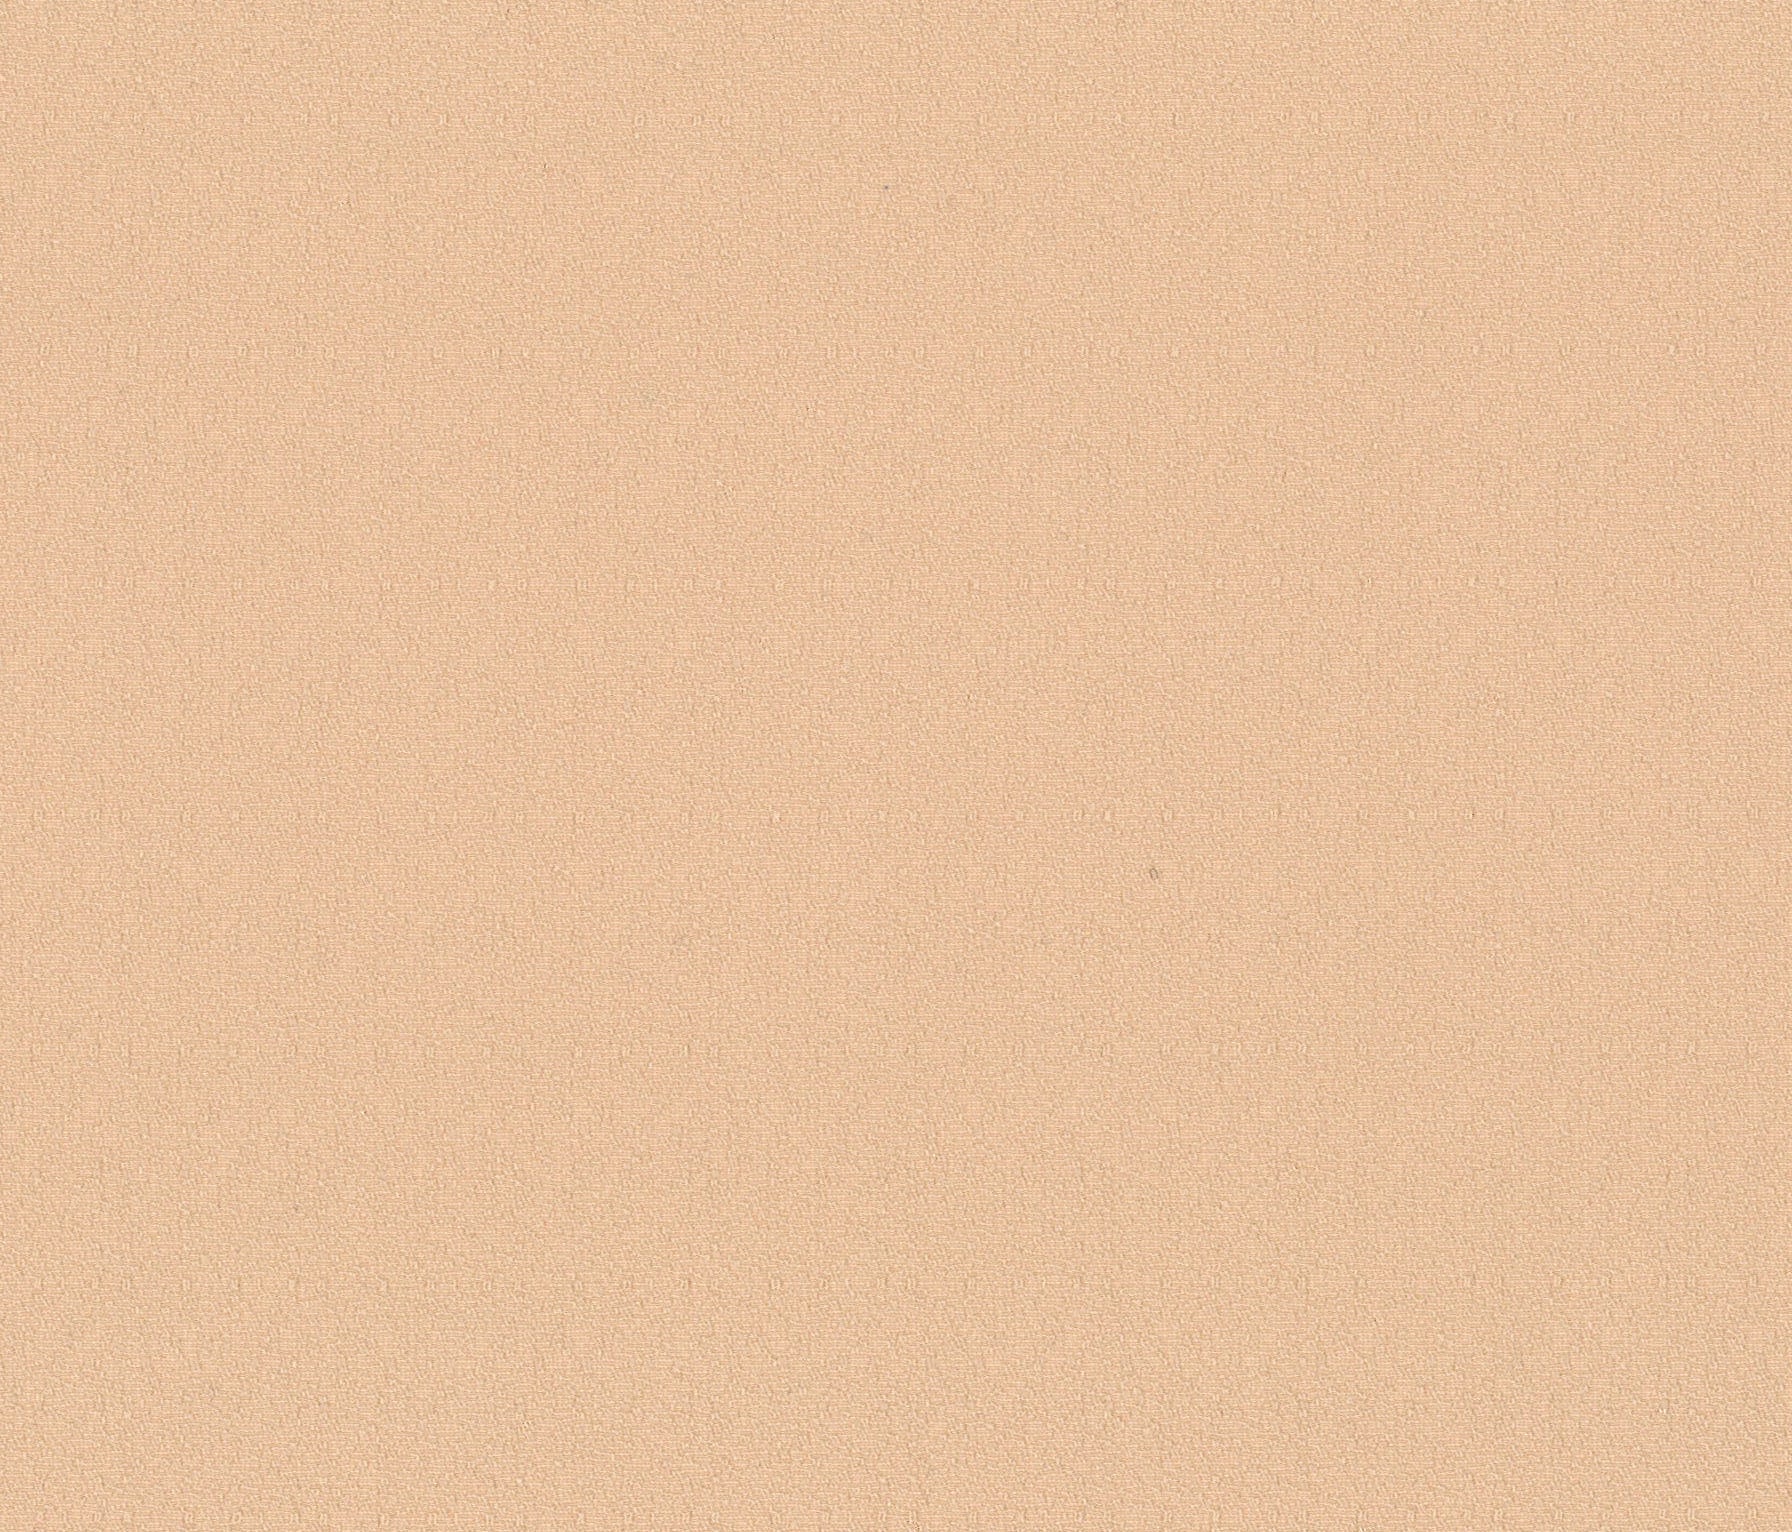 34018-02 Apricot Montel Crepe Pain Dyed Blend 223g/yd 45" beige crepe plain dyed polyester spandex woven Solid Color, Crepe - knit fabric - woven fabric - fabric company - fabric wholesale - fabric b2b - fabric factory - high quality fabric - hong kong fabric - fabric hk - acetate fabric - cotton fabric - linen fabric - metallic fabric - nylon fabric - polyester fabric - spandex fabric - chun wing hing - cwh hk - fabric worldwide ship - 針織布 - 梳織布 - 布料公司- 布料批發 - 香港布料 - 秦榮興